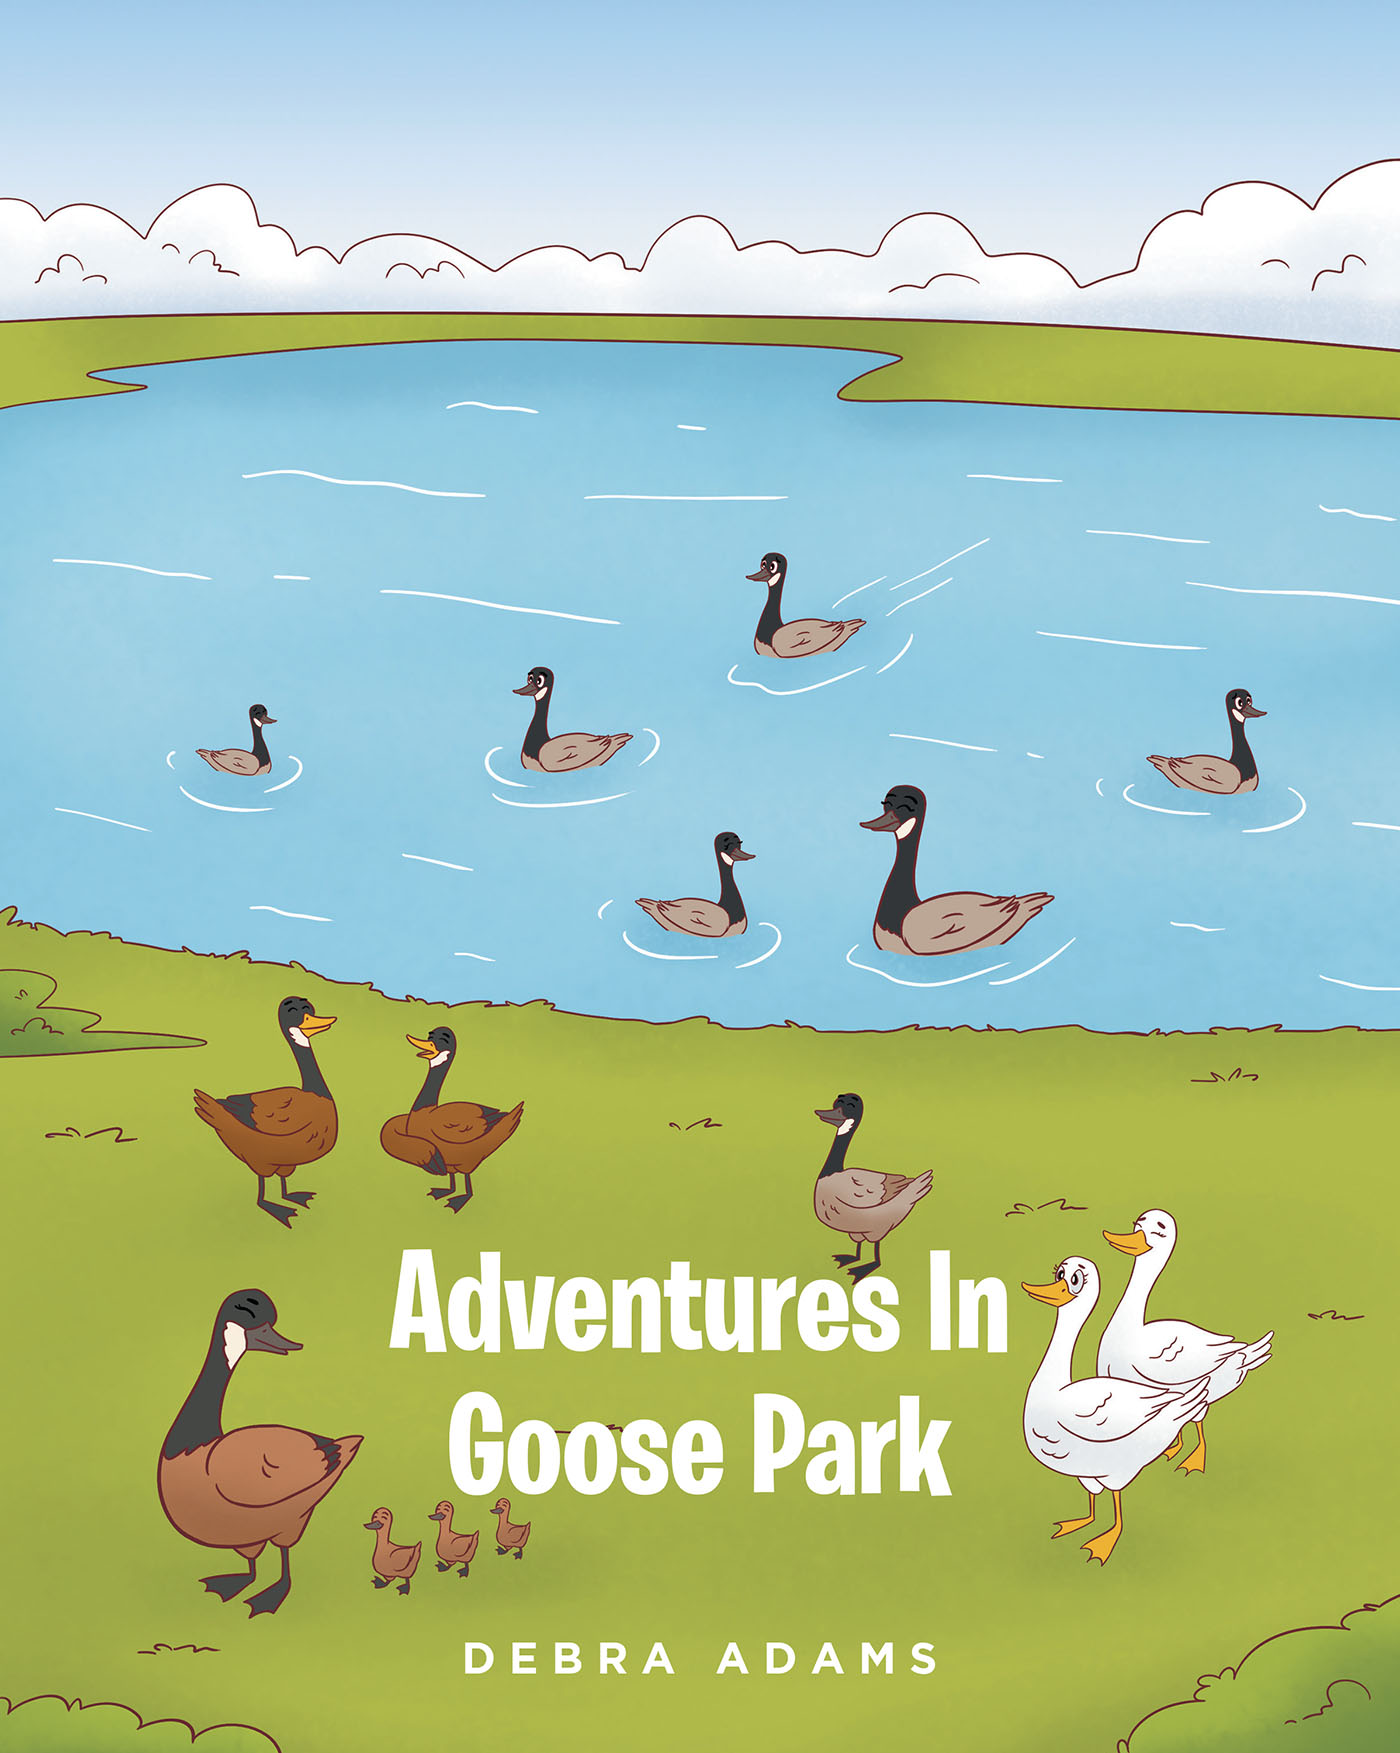 Debra Adams’s New Book, "Adventures in Goose Park," is a Series of Short Stories That Follows a Flock of Geese Who Must Work Together to Solve the Problems They Encounter